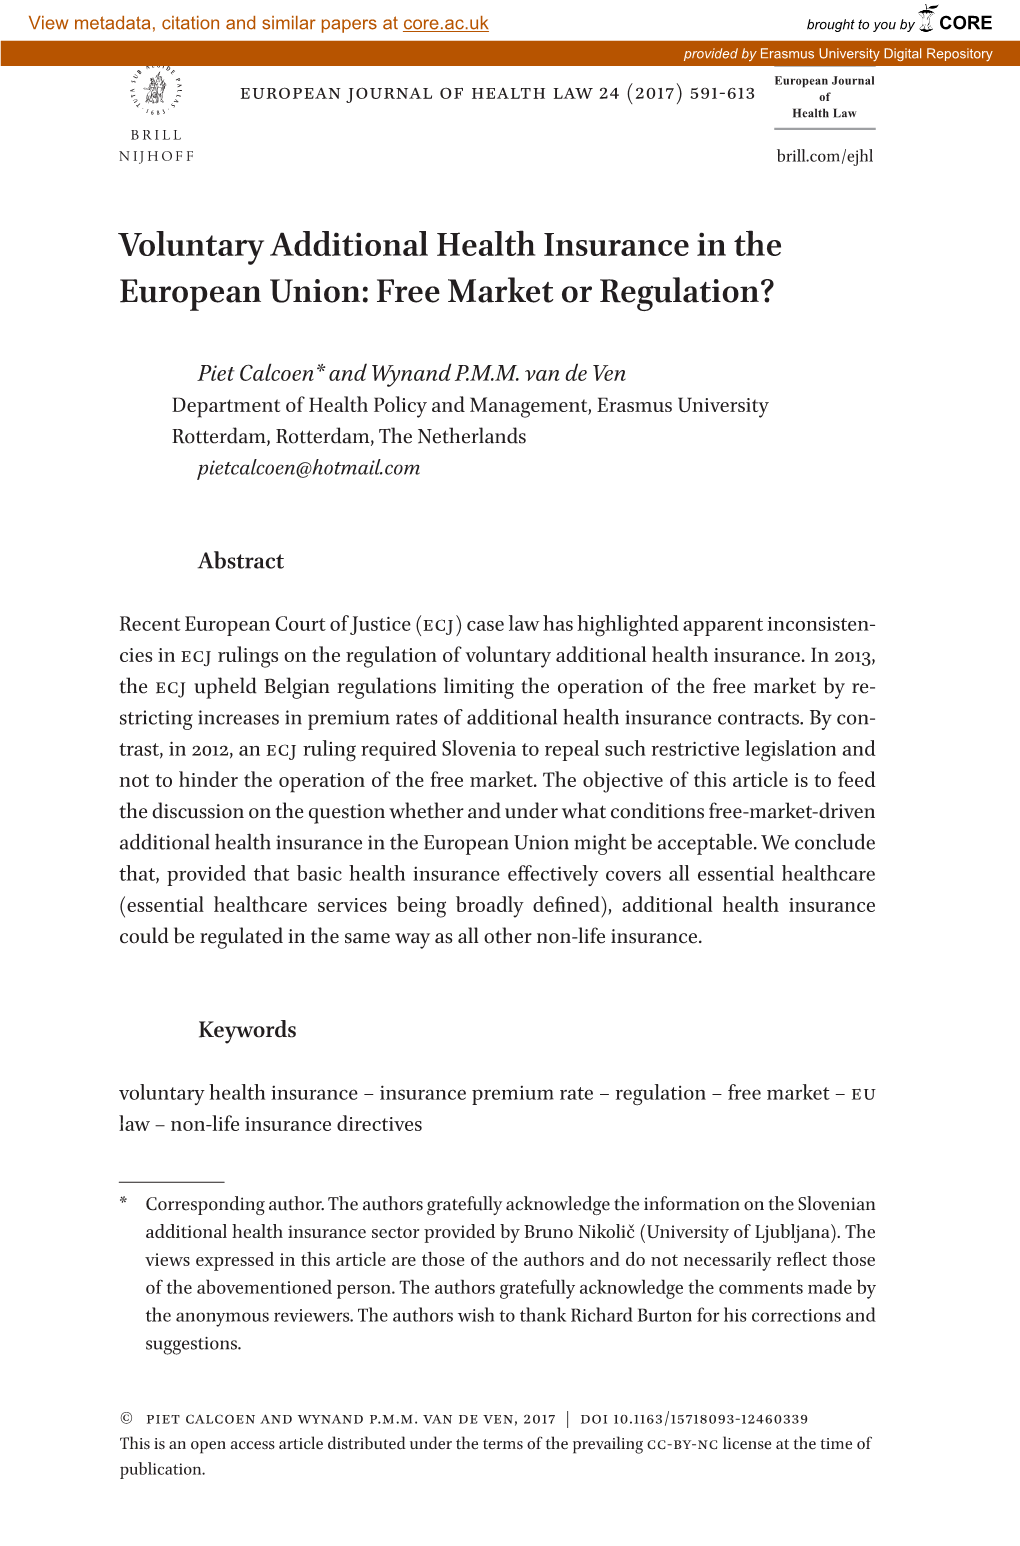 Voluntary Additional Health Insurance in the European Union: Free Market Or Regulation?